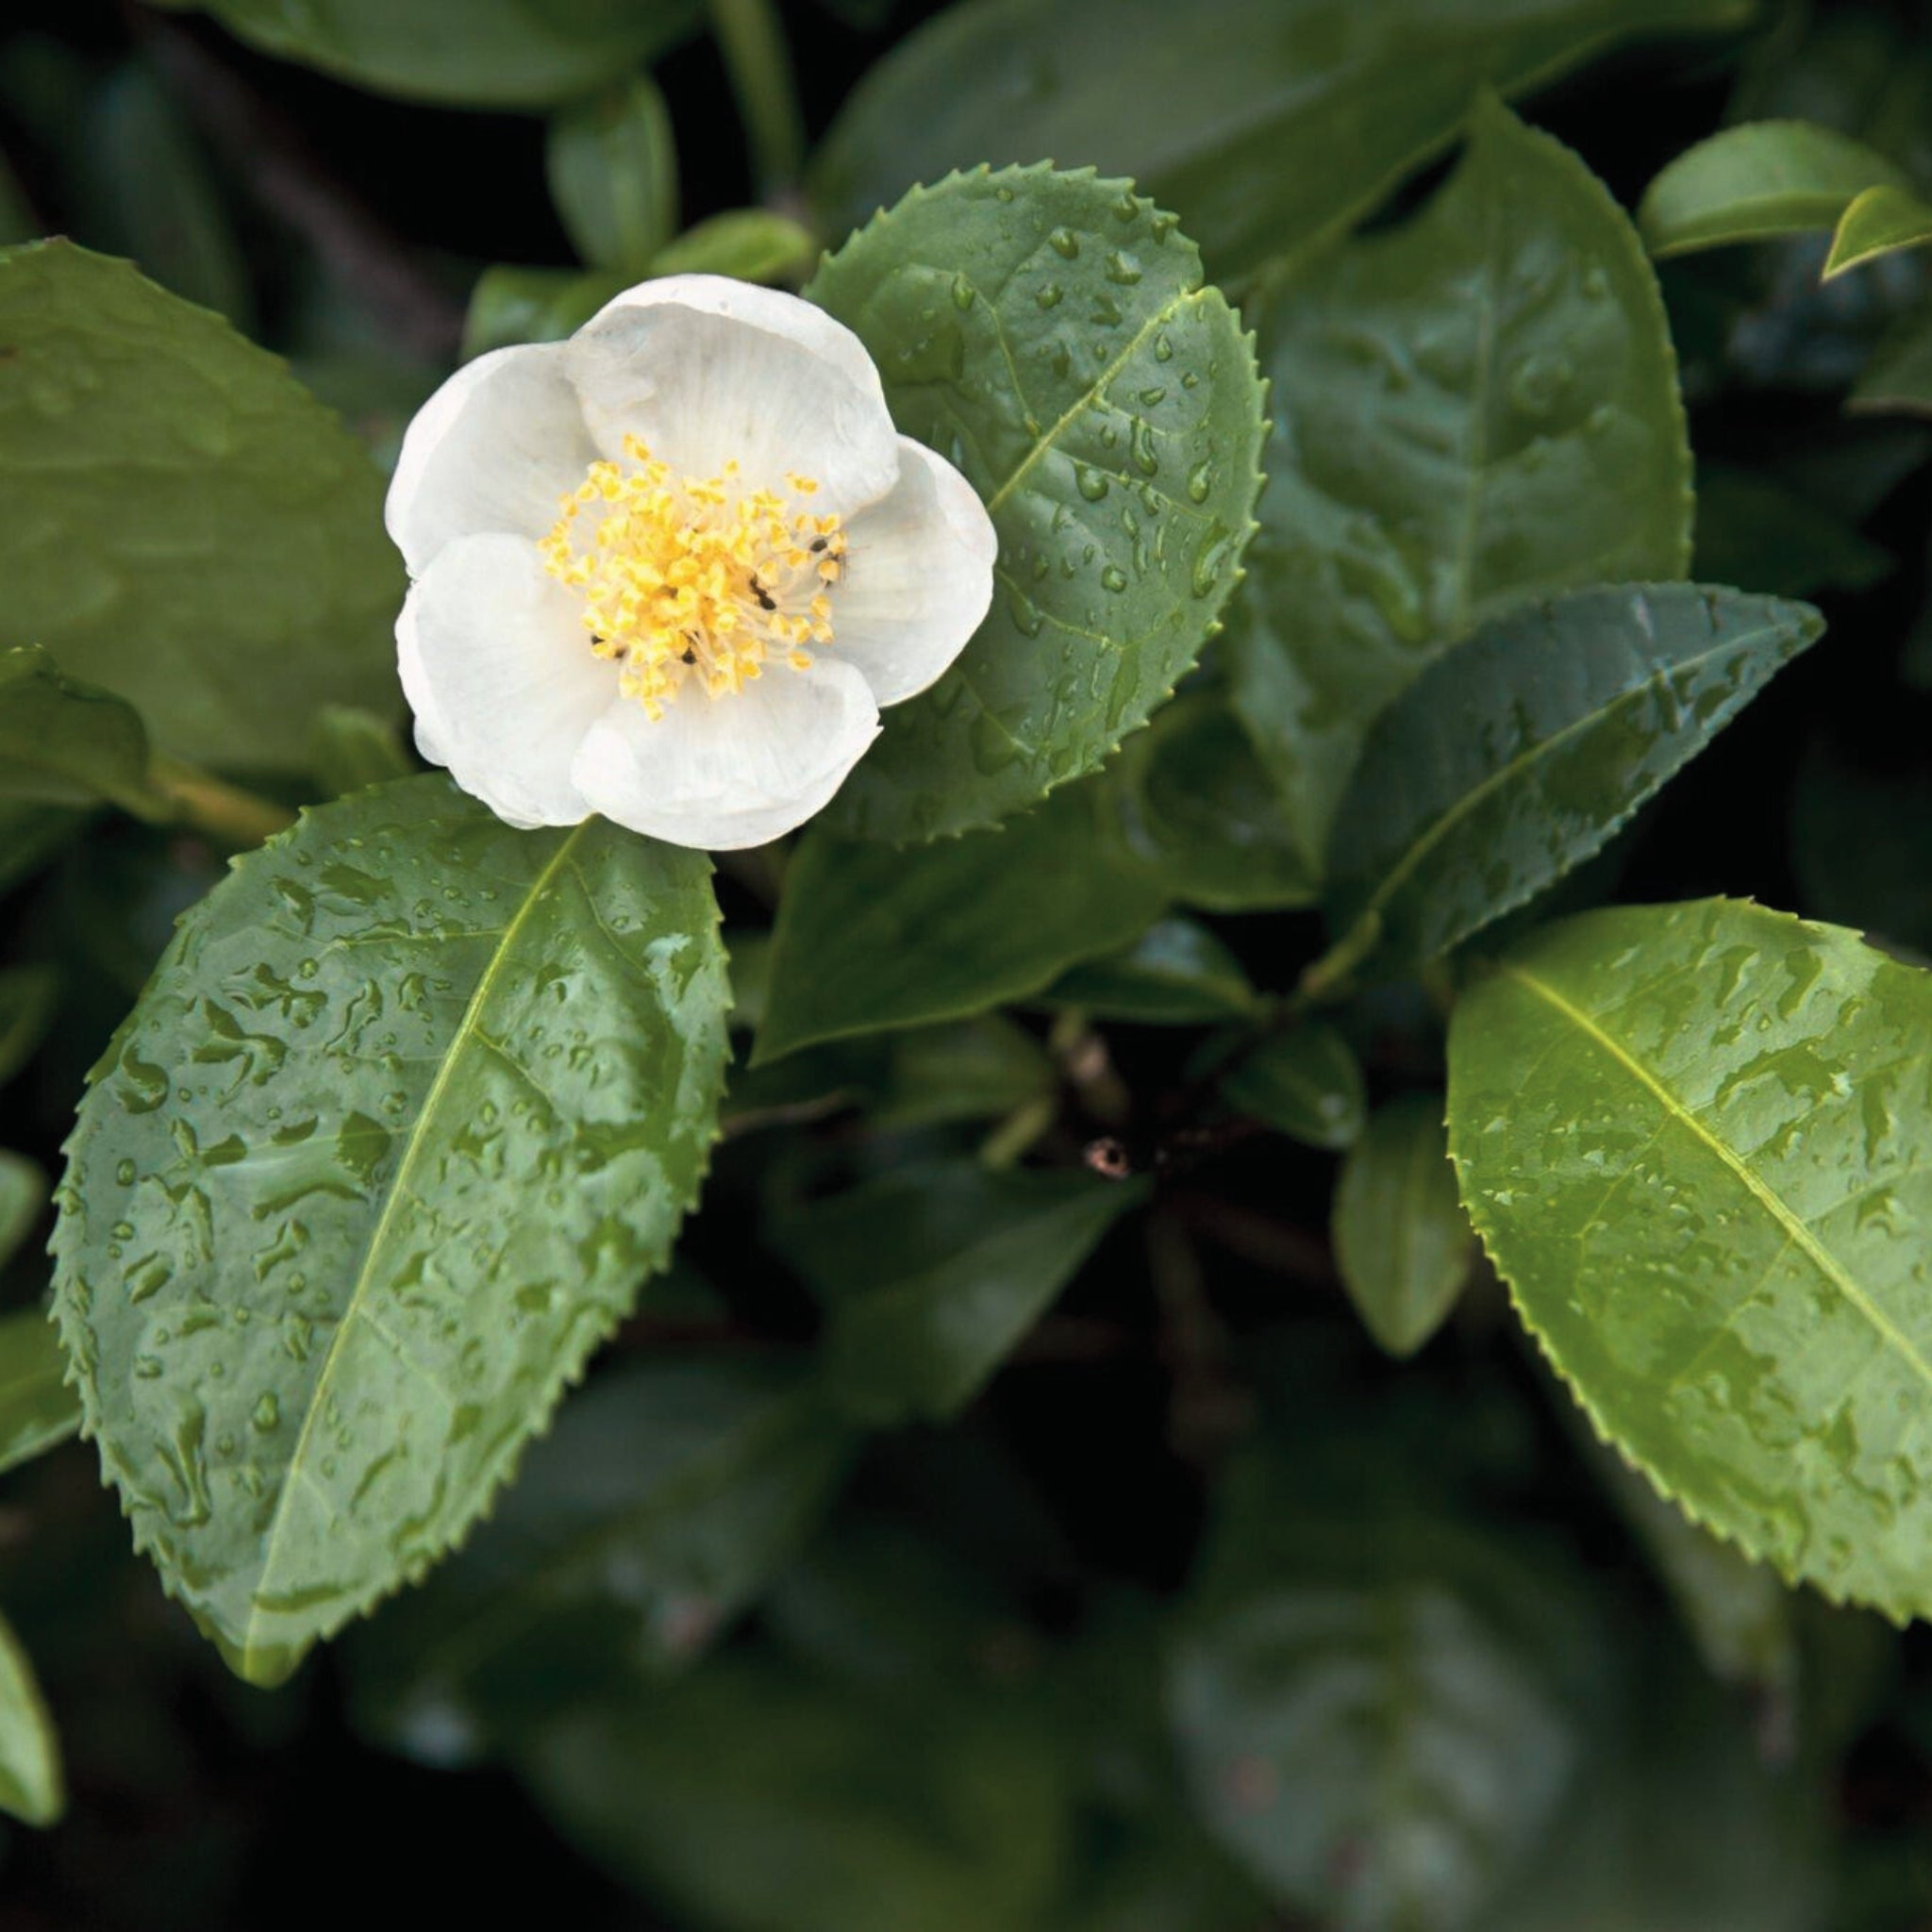 Camellia Sinensis Leaf, experience the antioxidant benefits of Camellia Sinensis Leaf Extract in our skincare products.